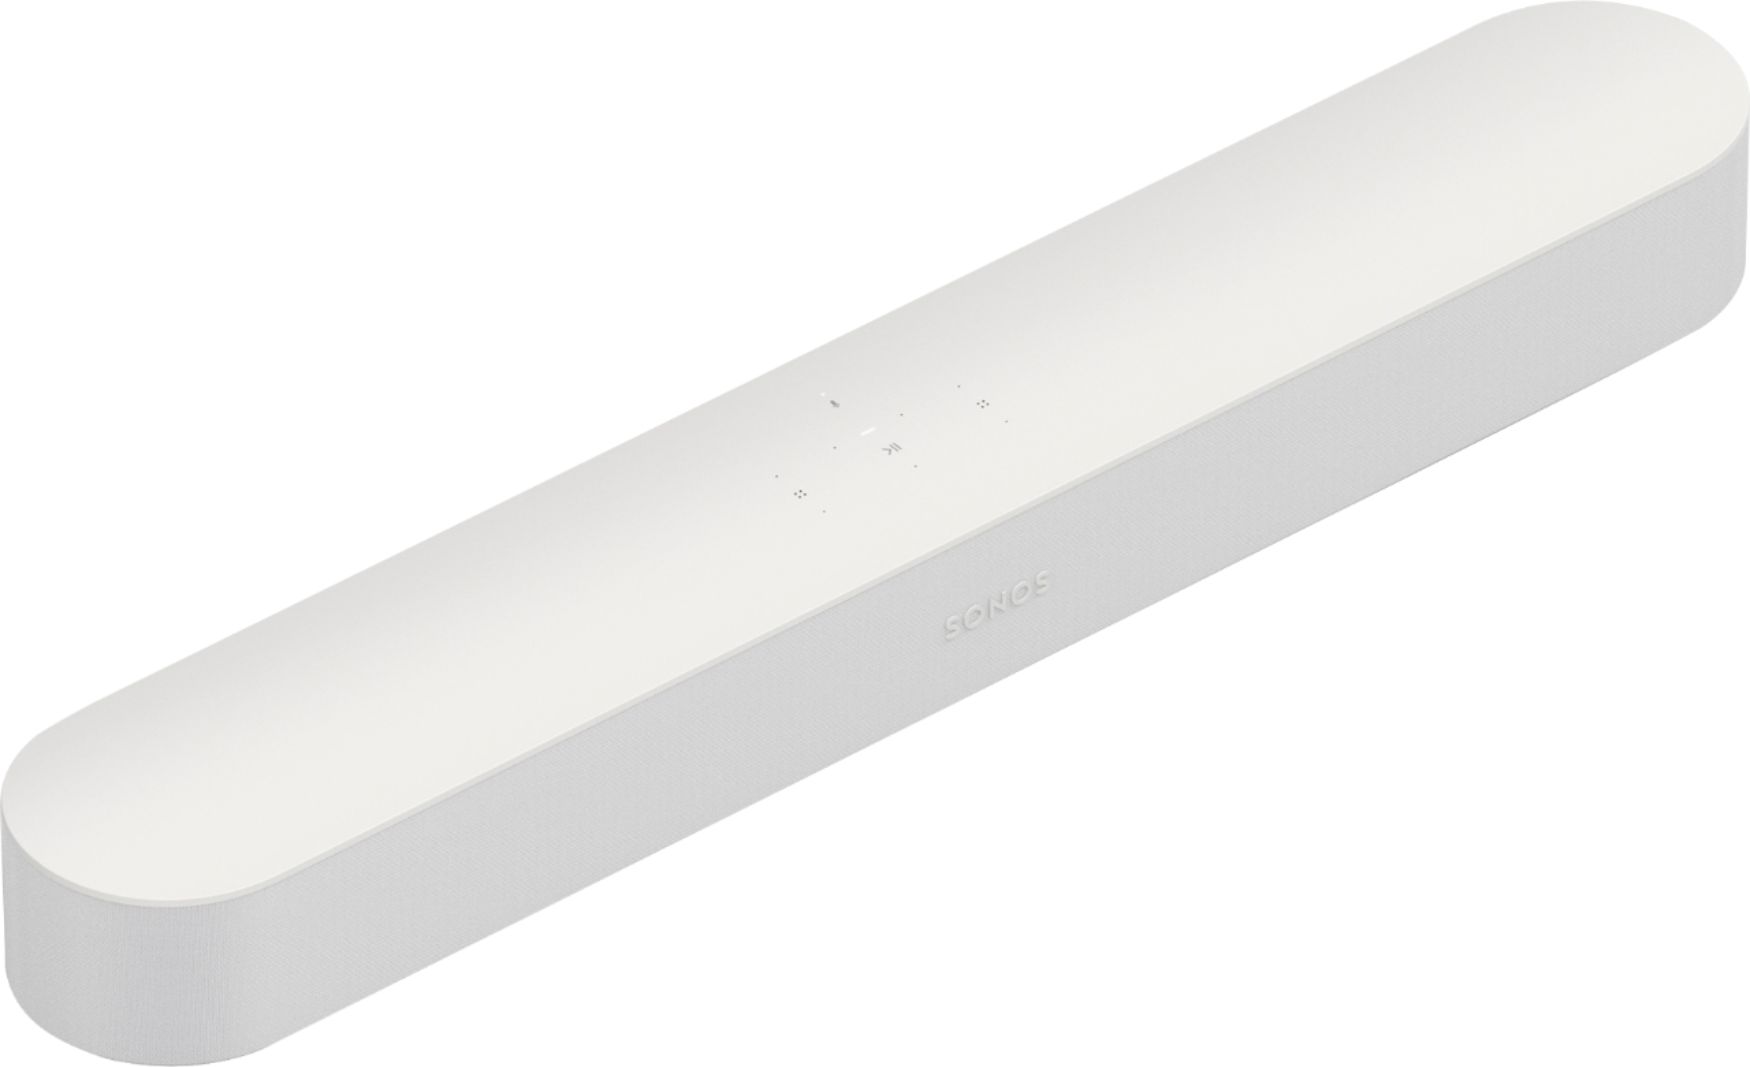 Angle View: Sonos - Short Straight Power Cable for Five, Beam, and Amp - White